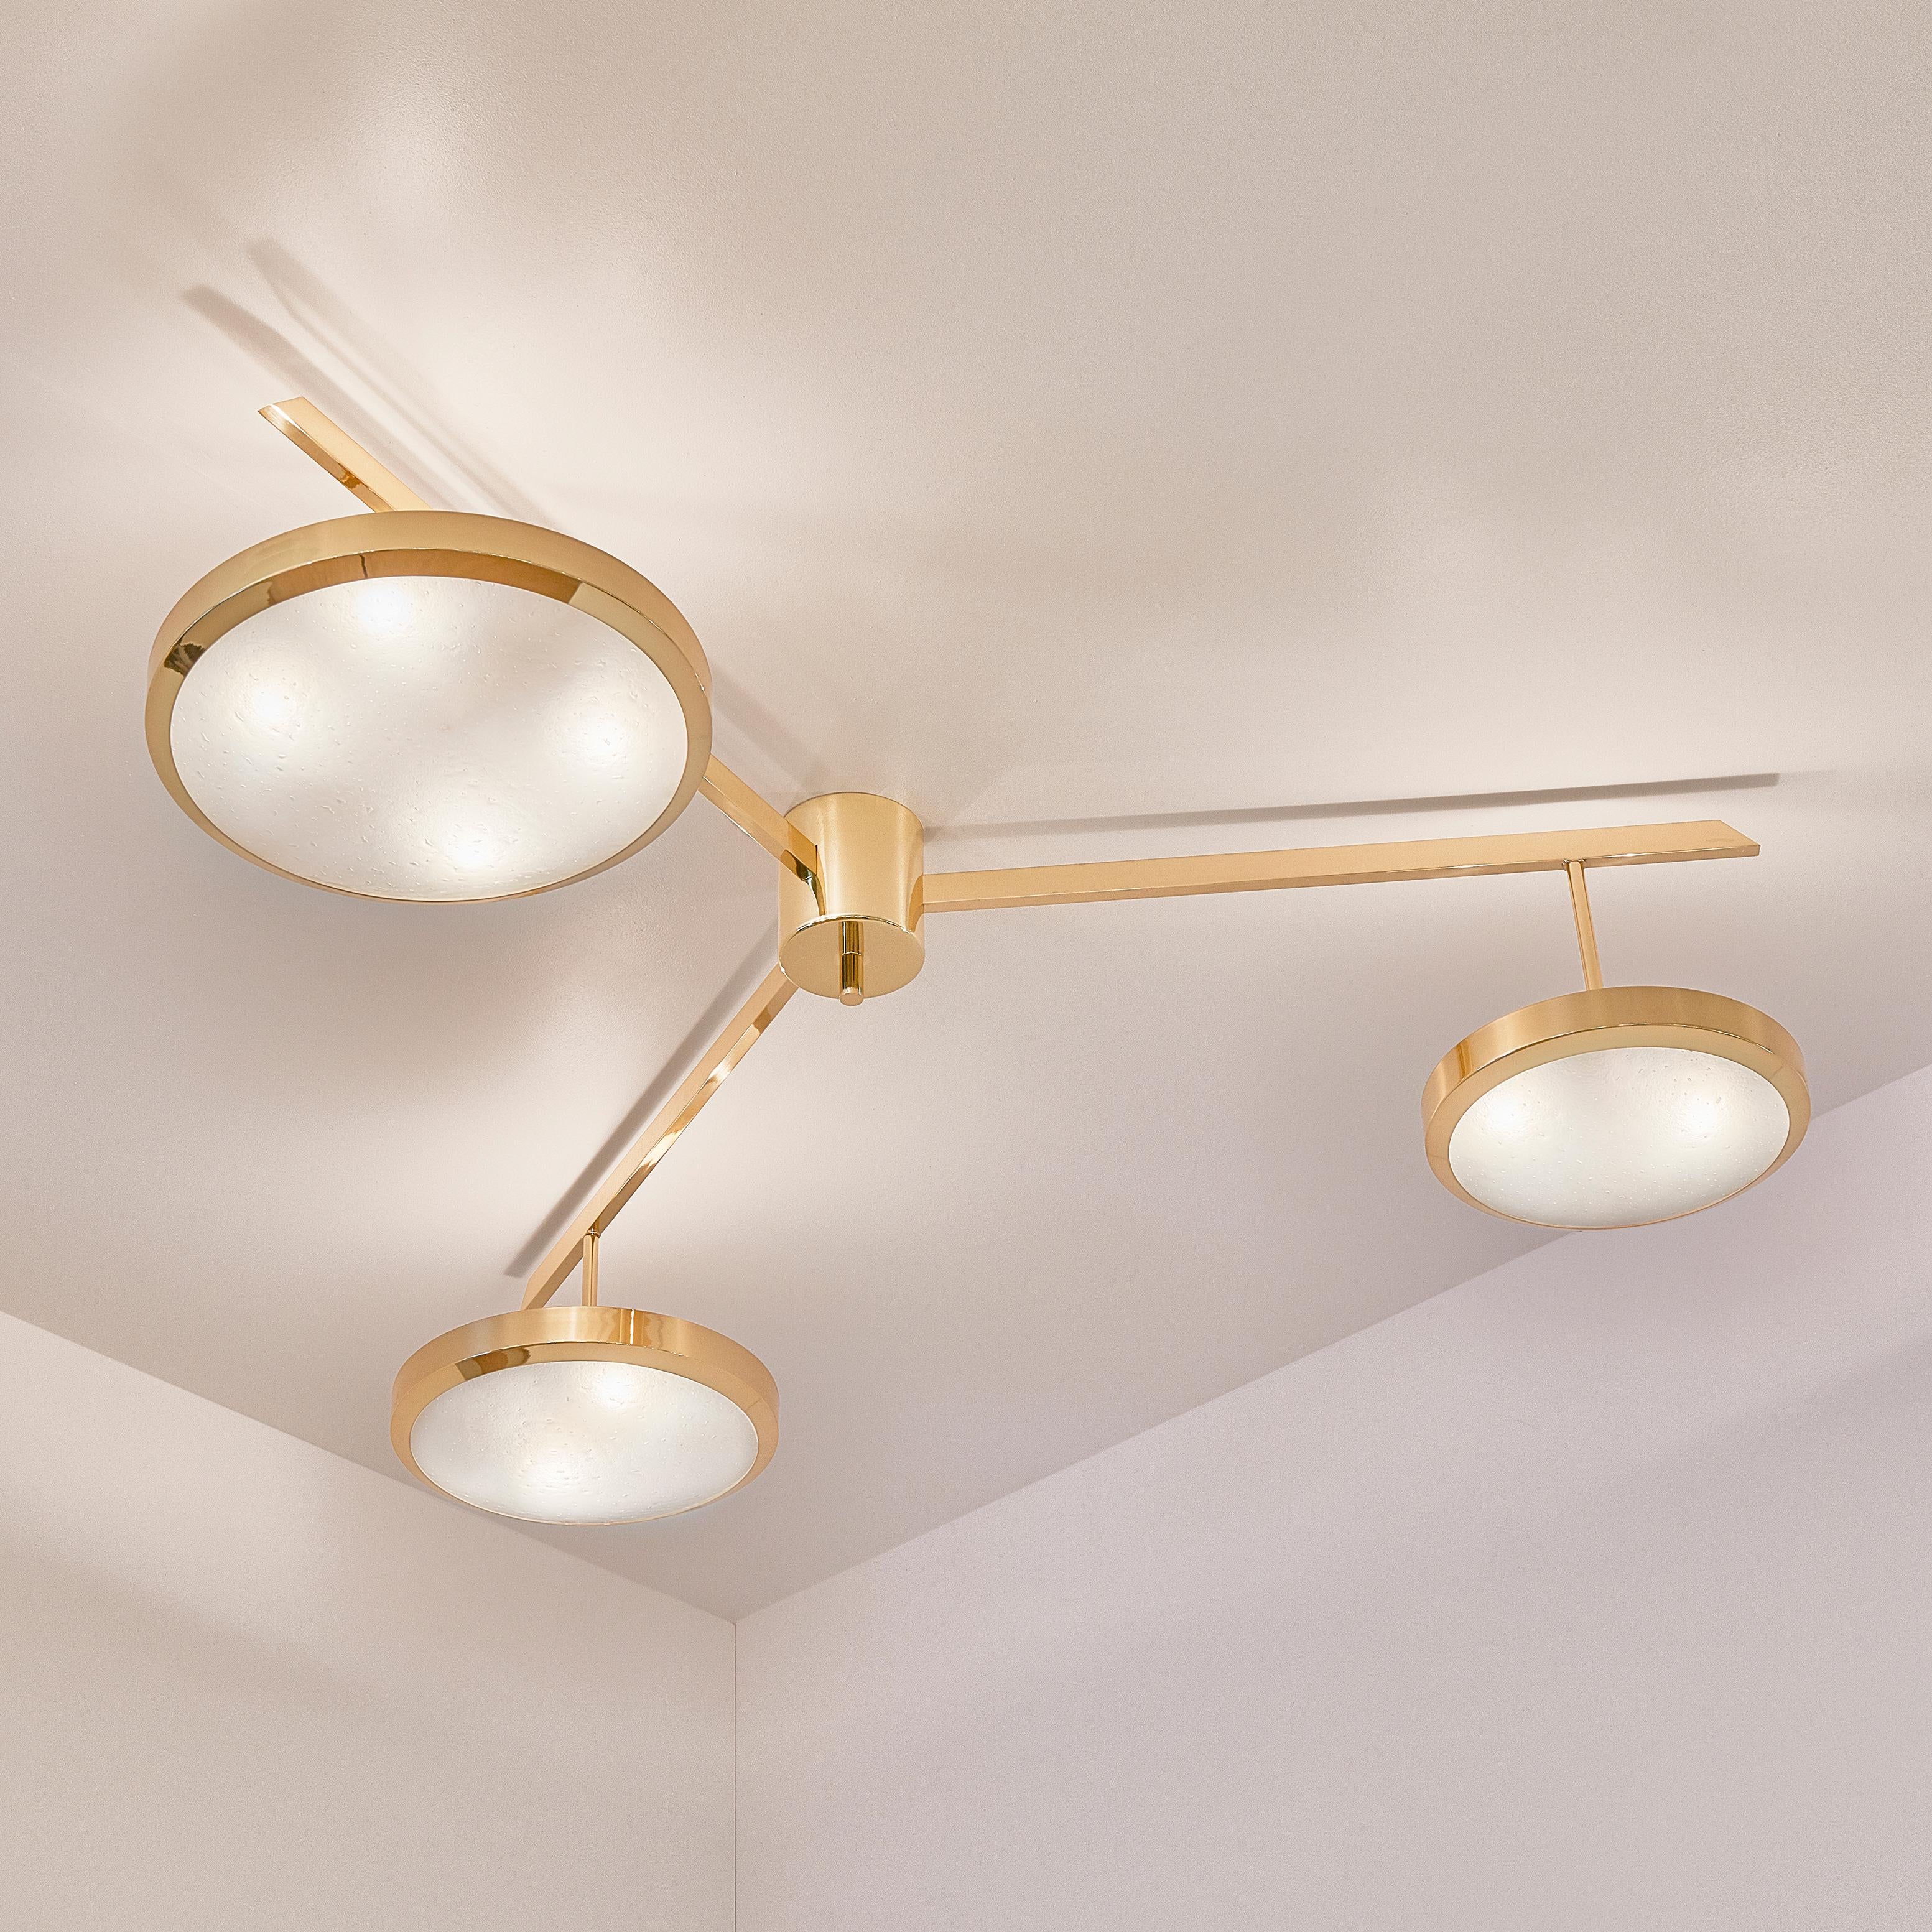 The Tre ceiling light harmoniously juxtaposes the balance of its three evenly spaced arms with the asymmetry of its variable size shades staggered at different heights. The first images show the fixture in our polished brass finish-subsequent